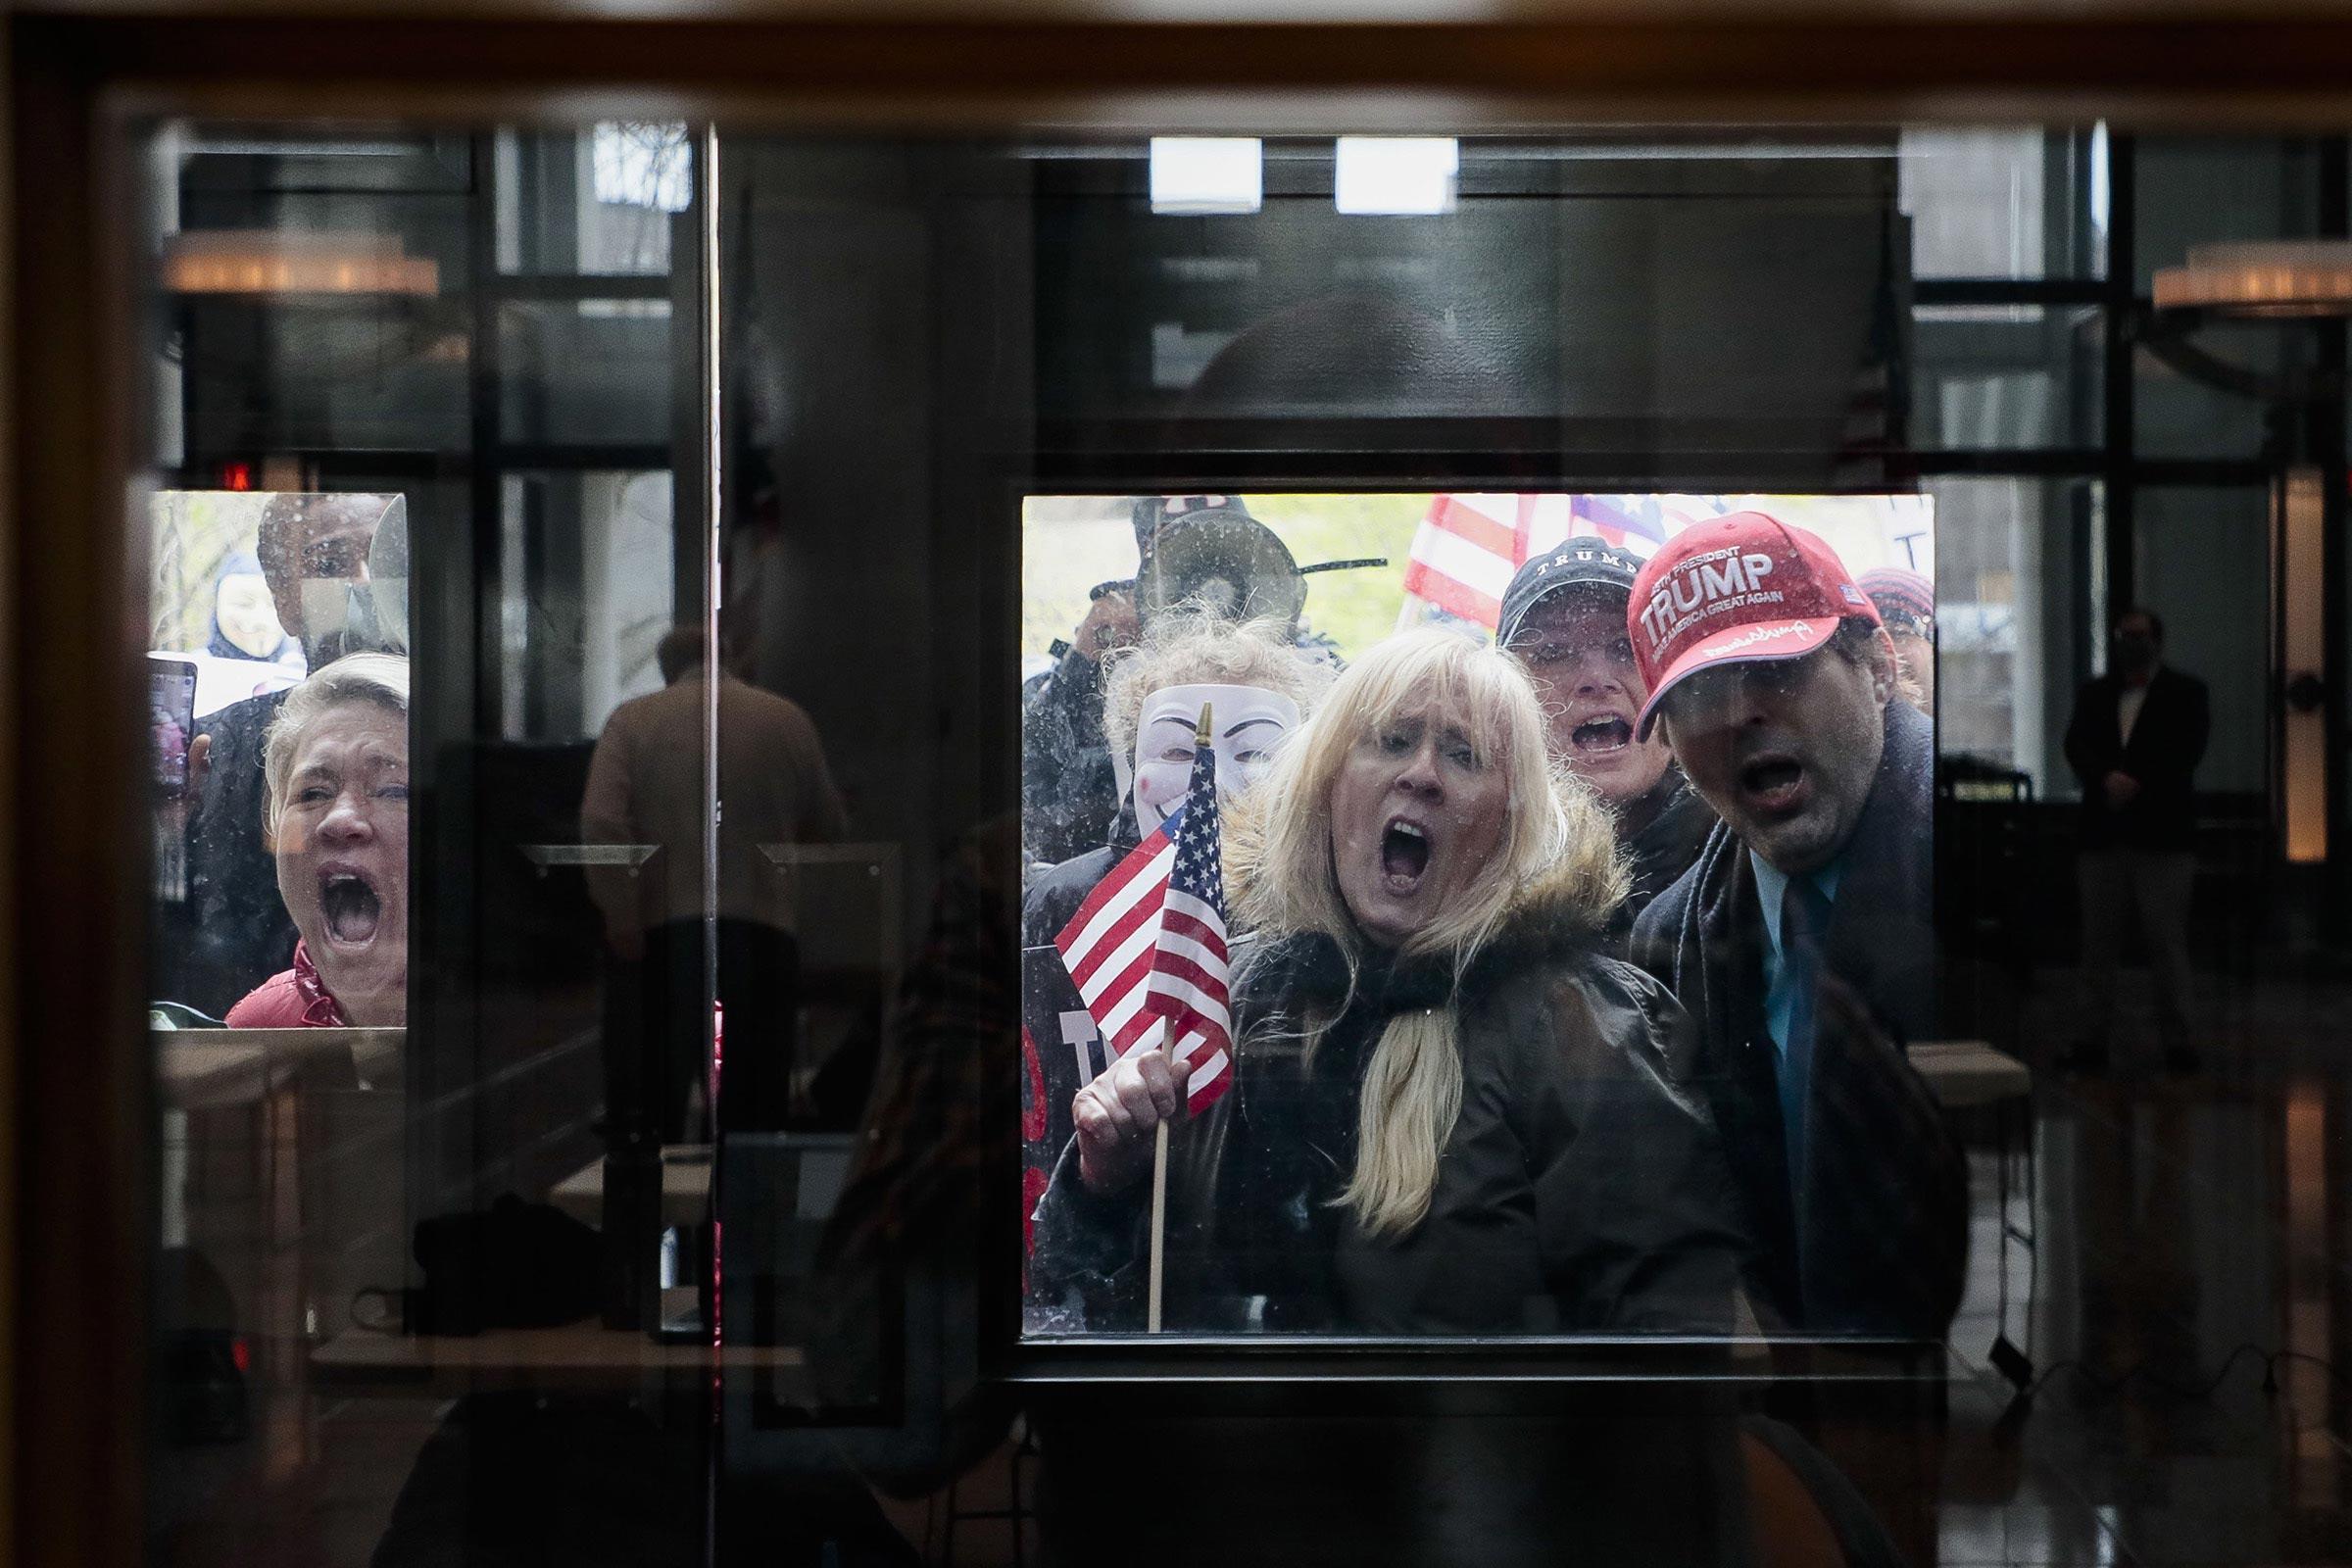 maskless protestors wearing Trump hats press against the windows of the statehouse in Columbus, Ohio in April 2020 to protest COVID-19 measures